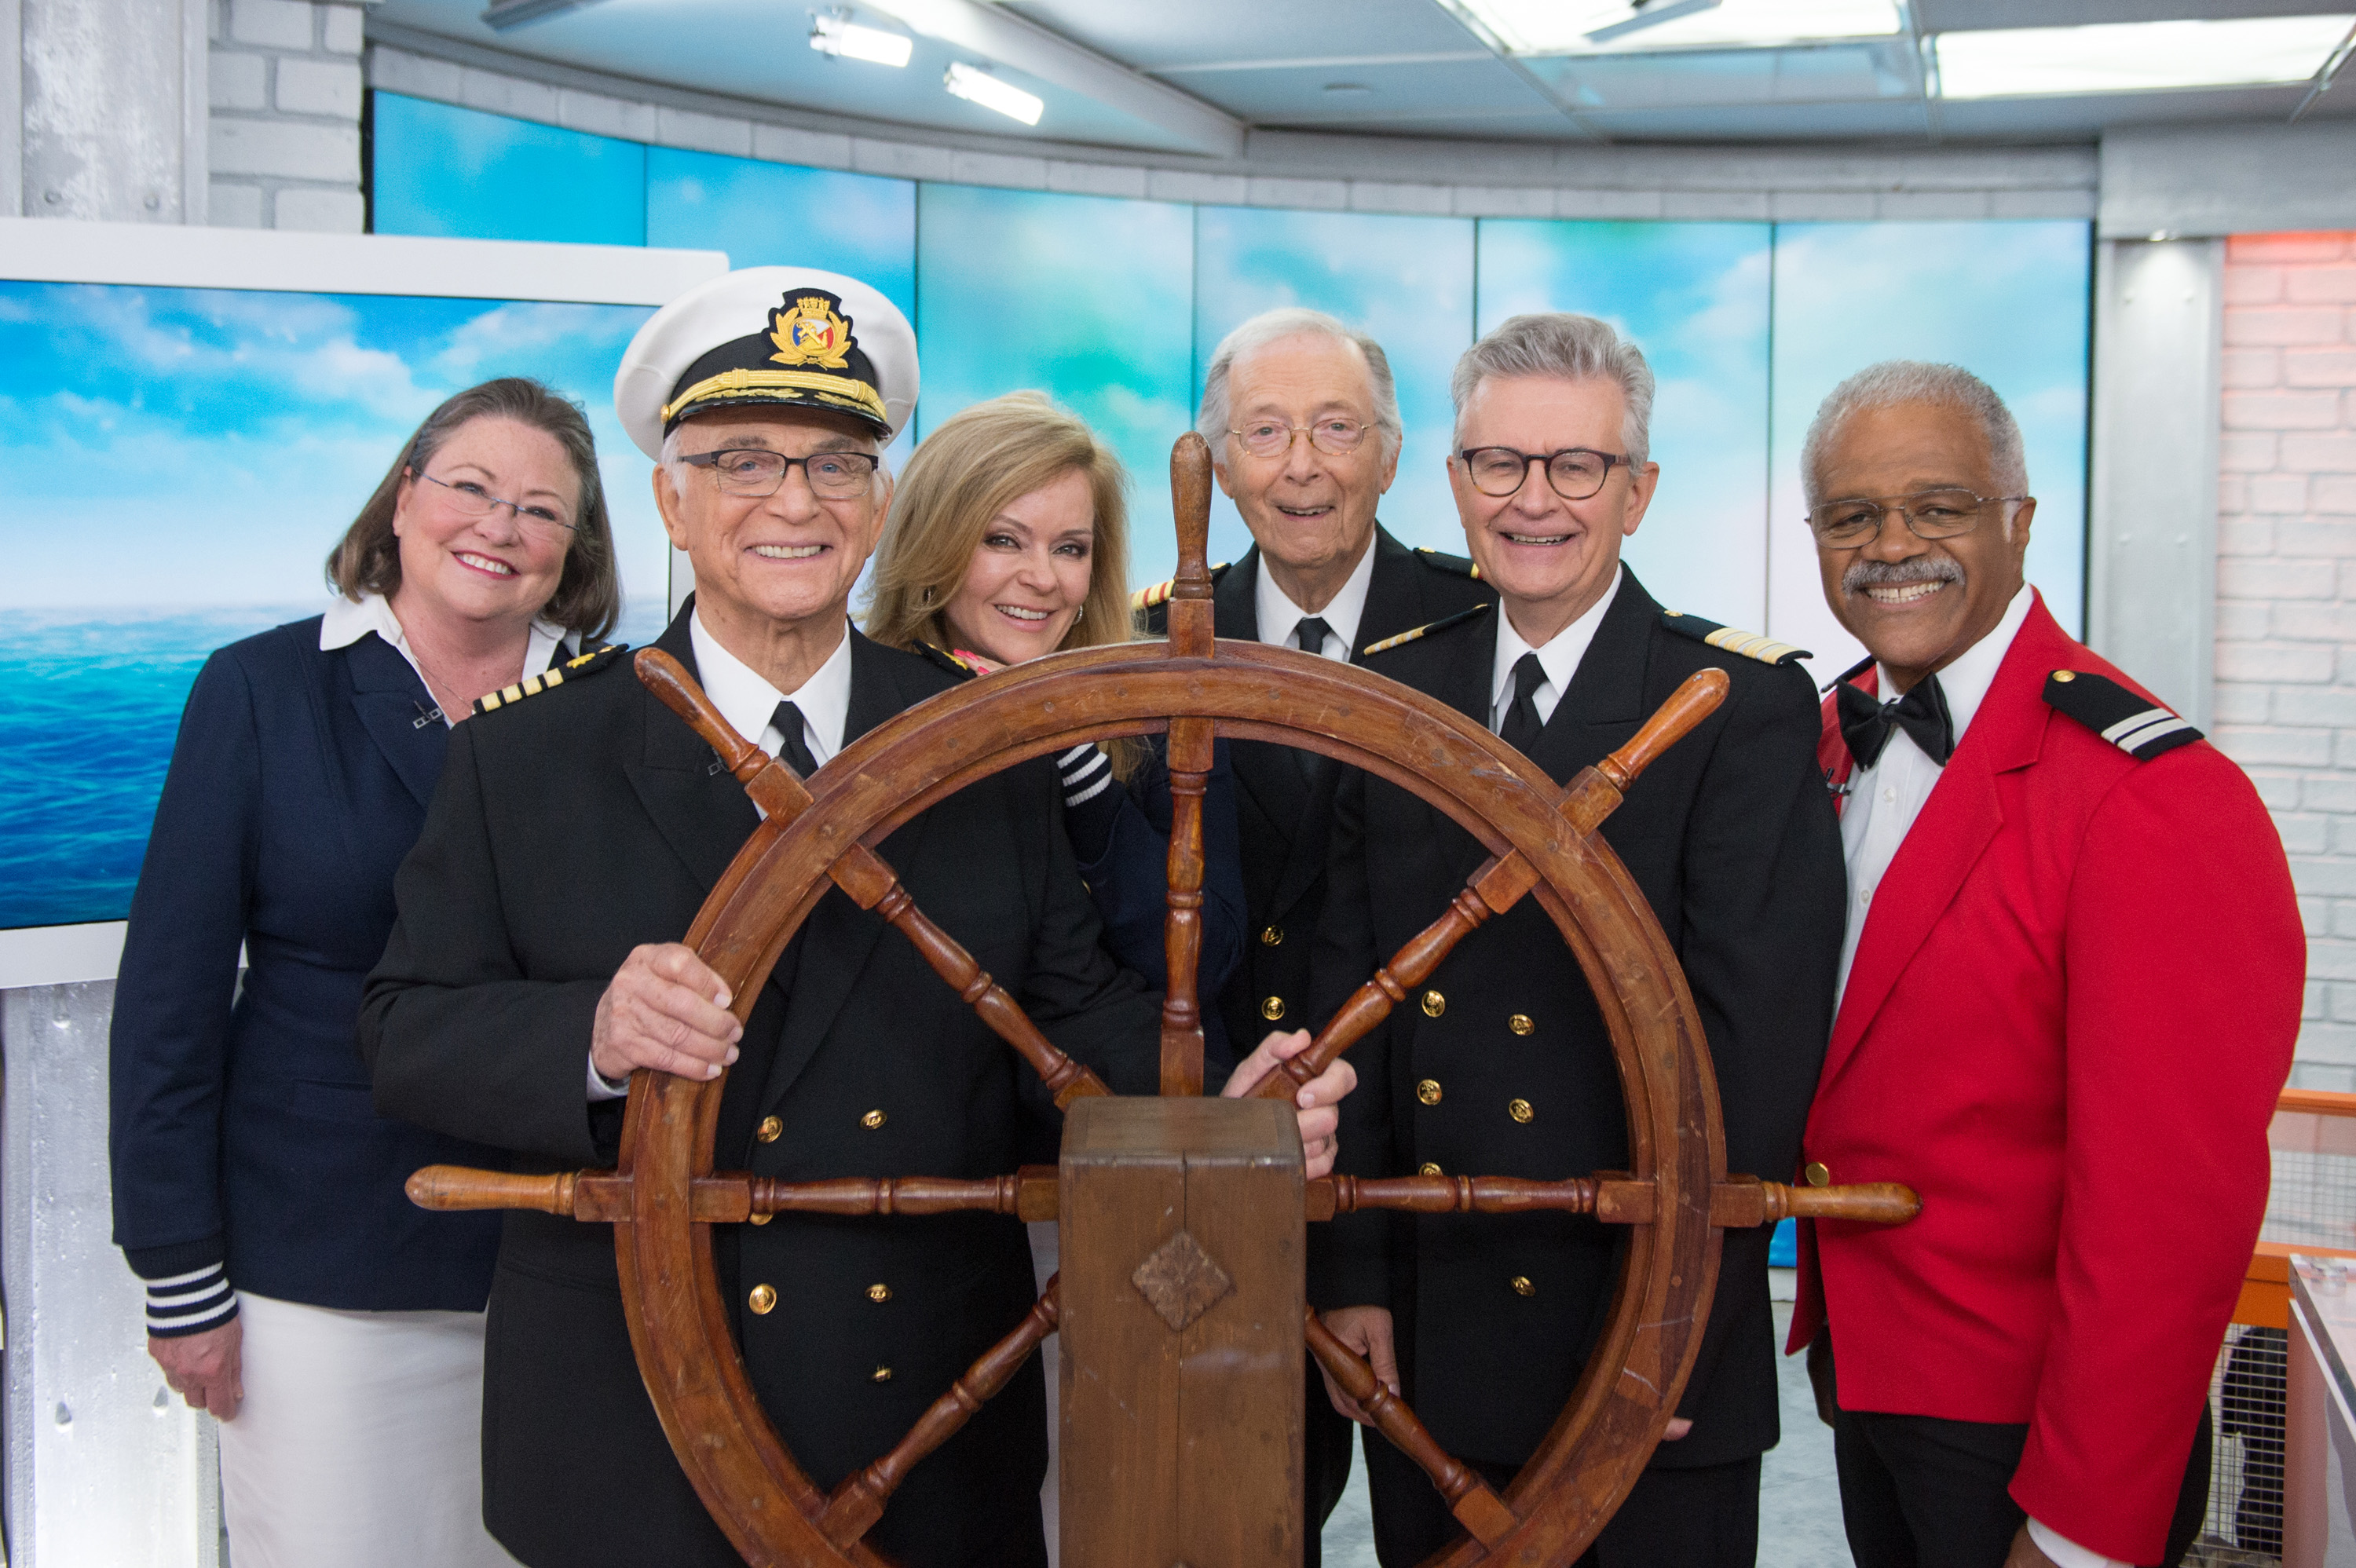 'The Love Boat' Cast Getty Images